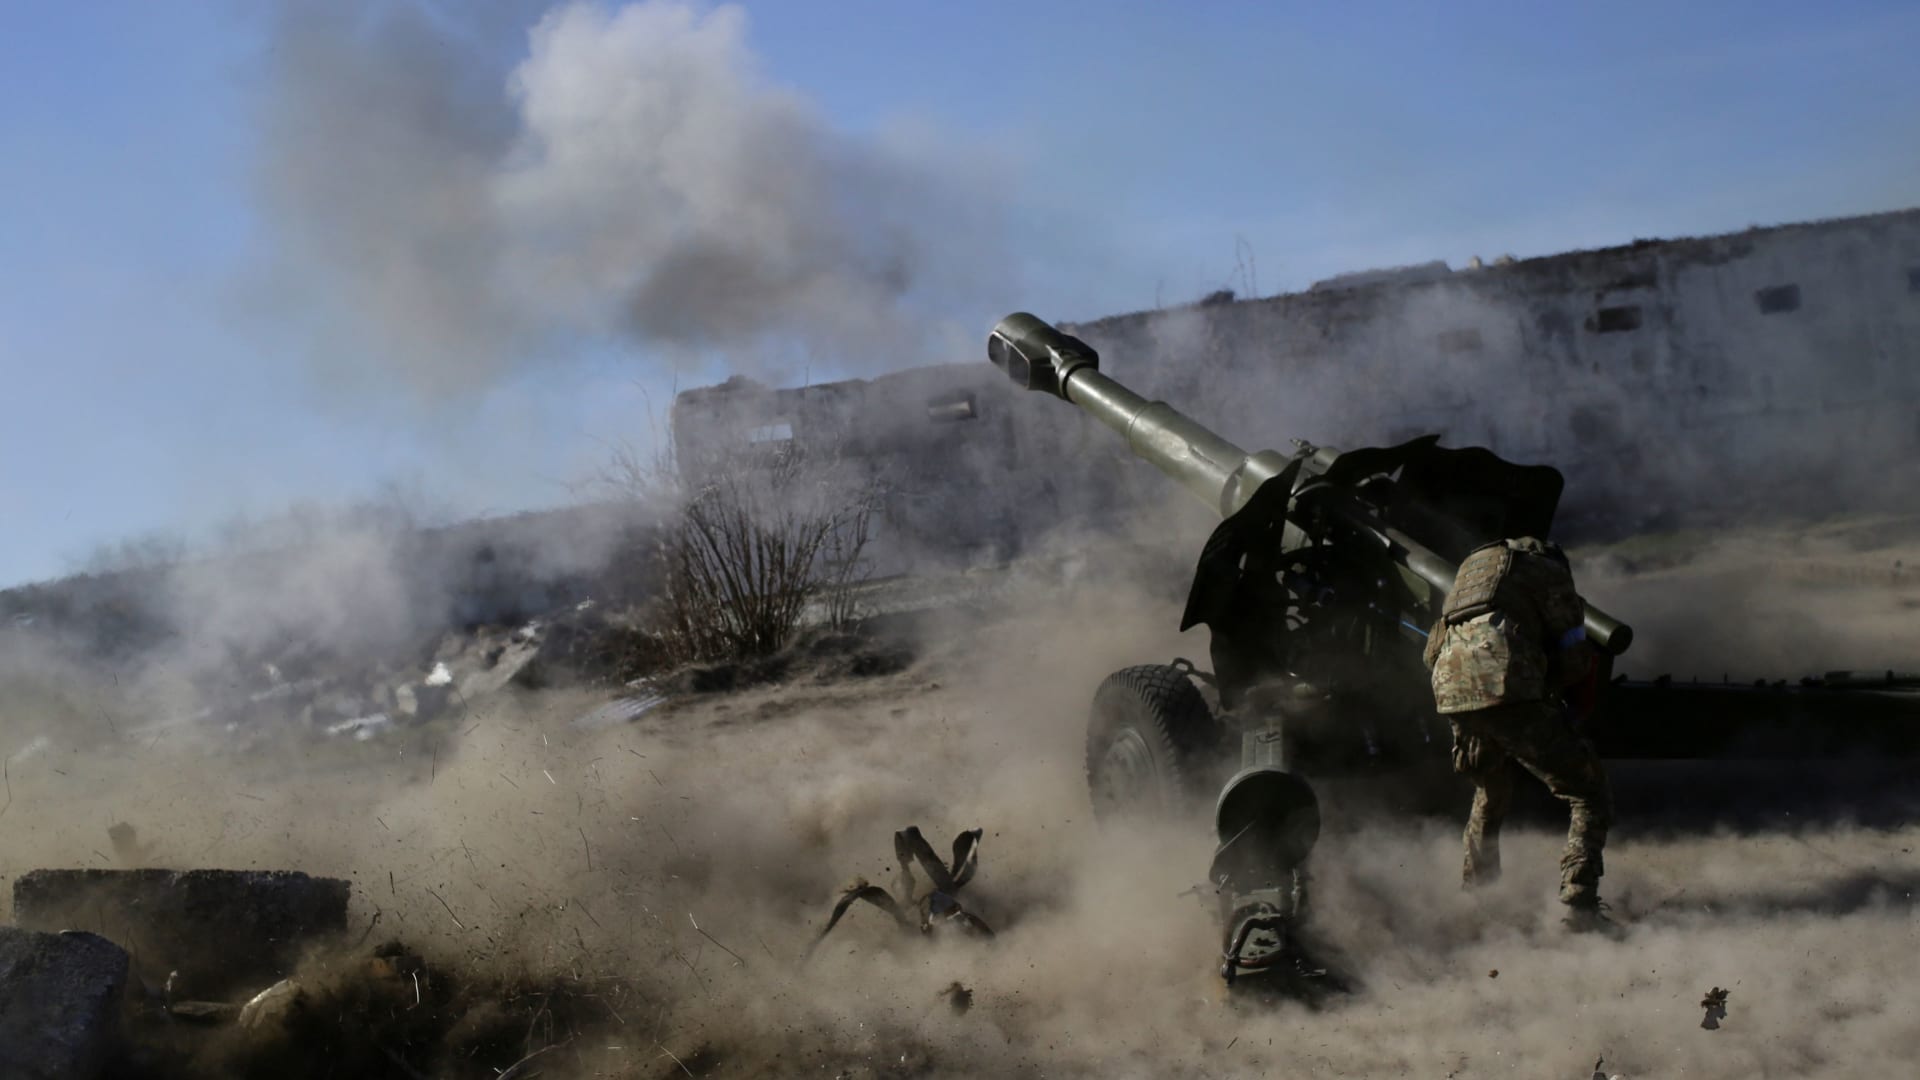 A member of the Ukrainian Volunteer Corps fires with a howitzer, as Russia's attack on Ukraine continues, at a position in Zaporizhzhia region, Ukraine March 28, 2022. Picture taken March 28, 2022. REUTERS/Stanislav Yurchenko